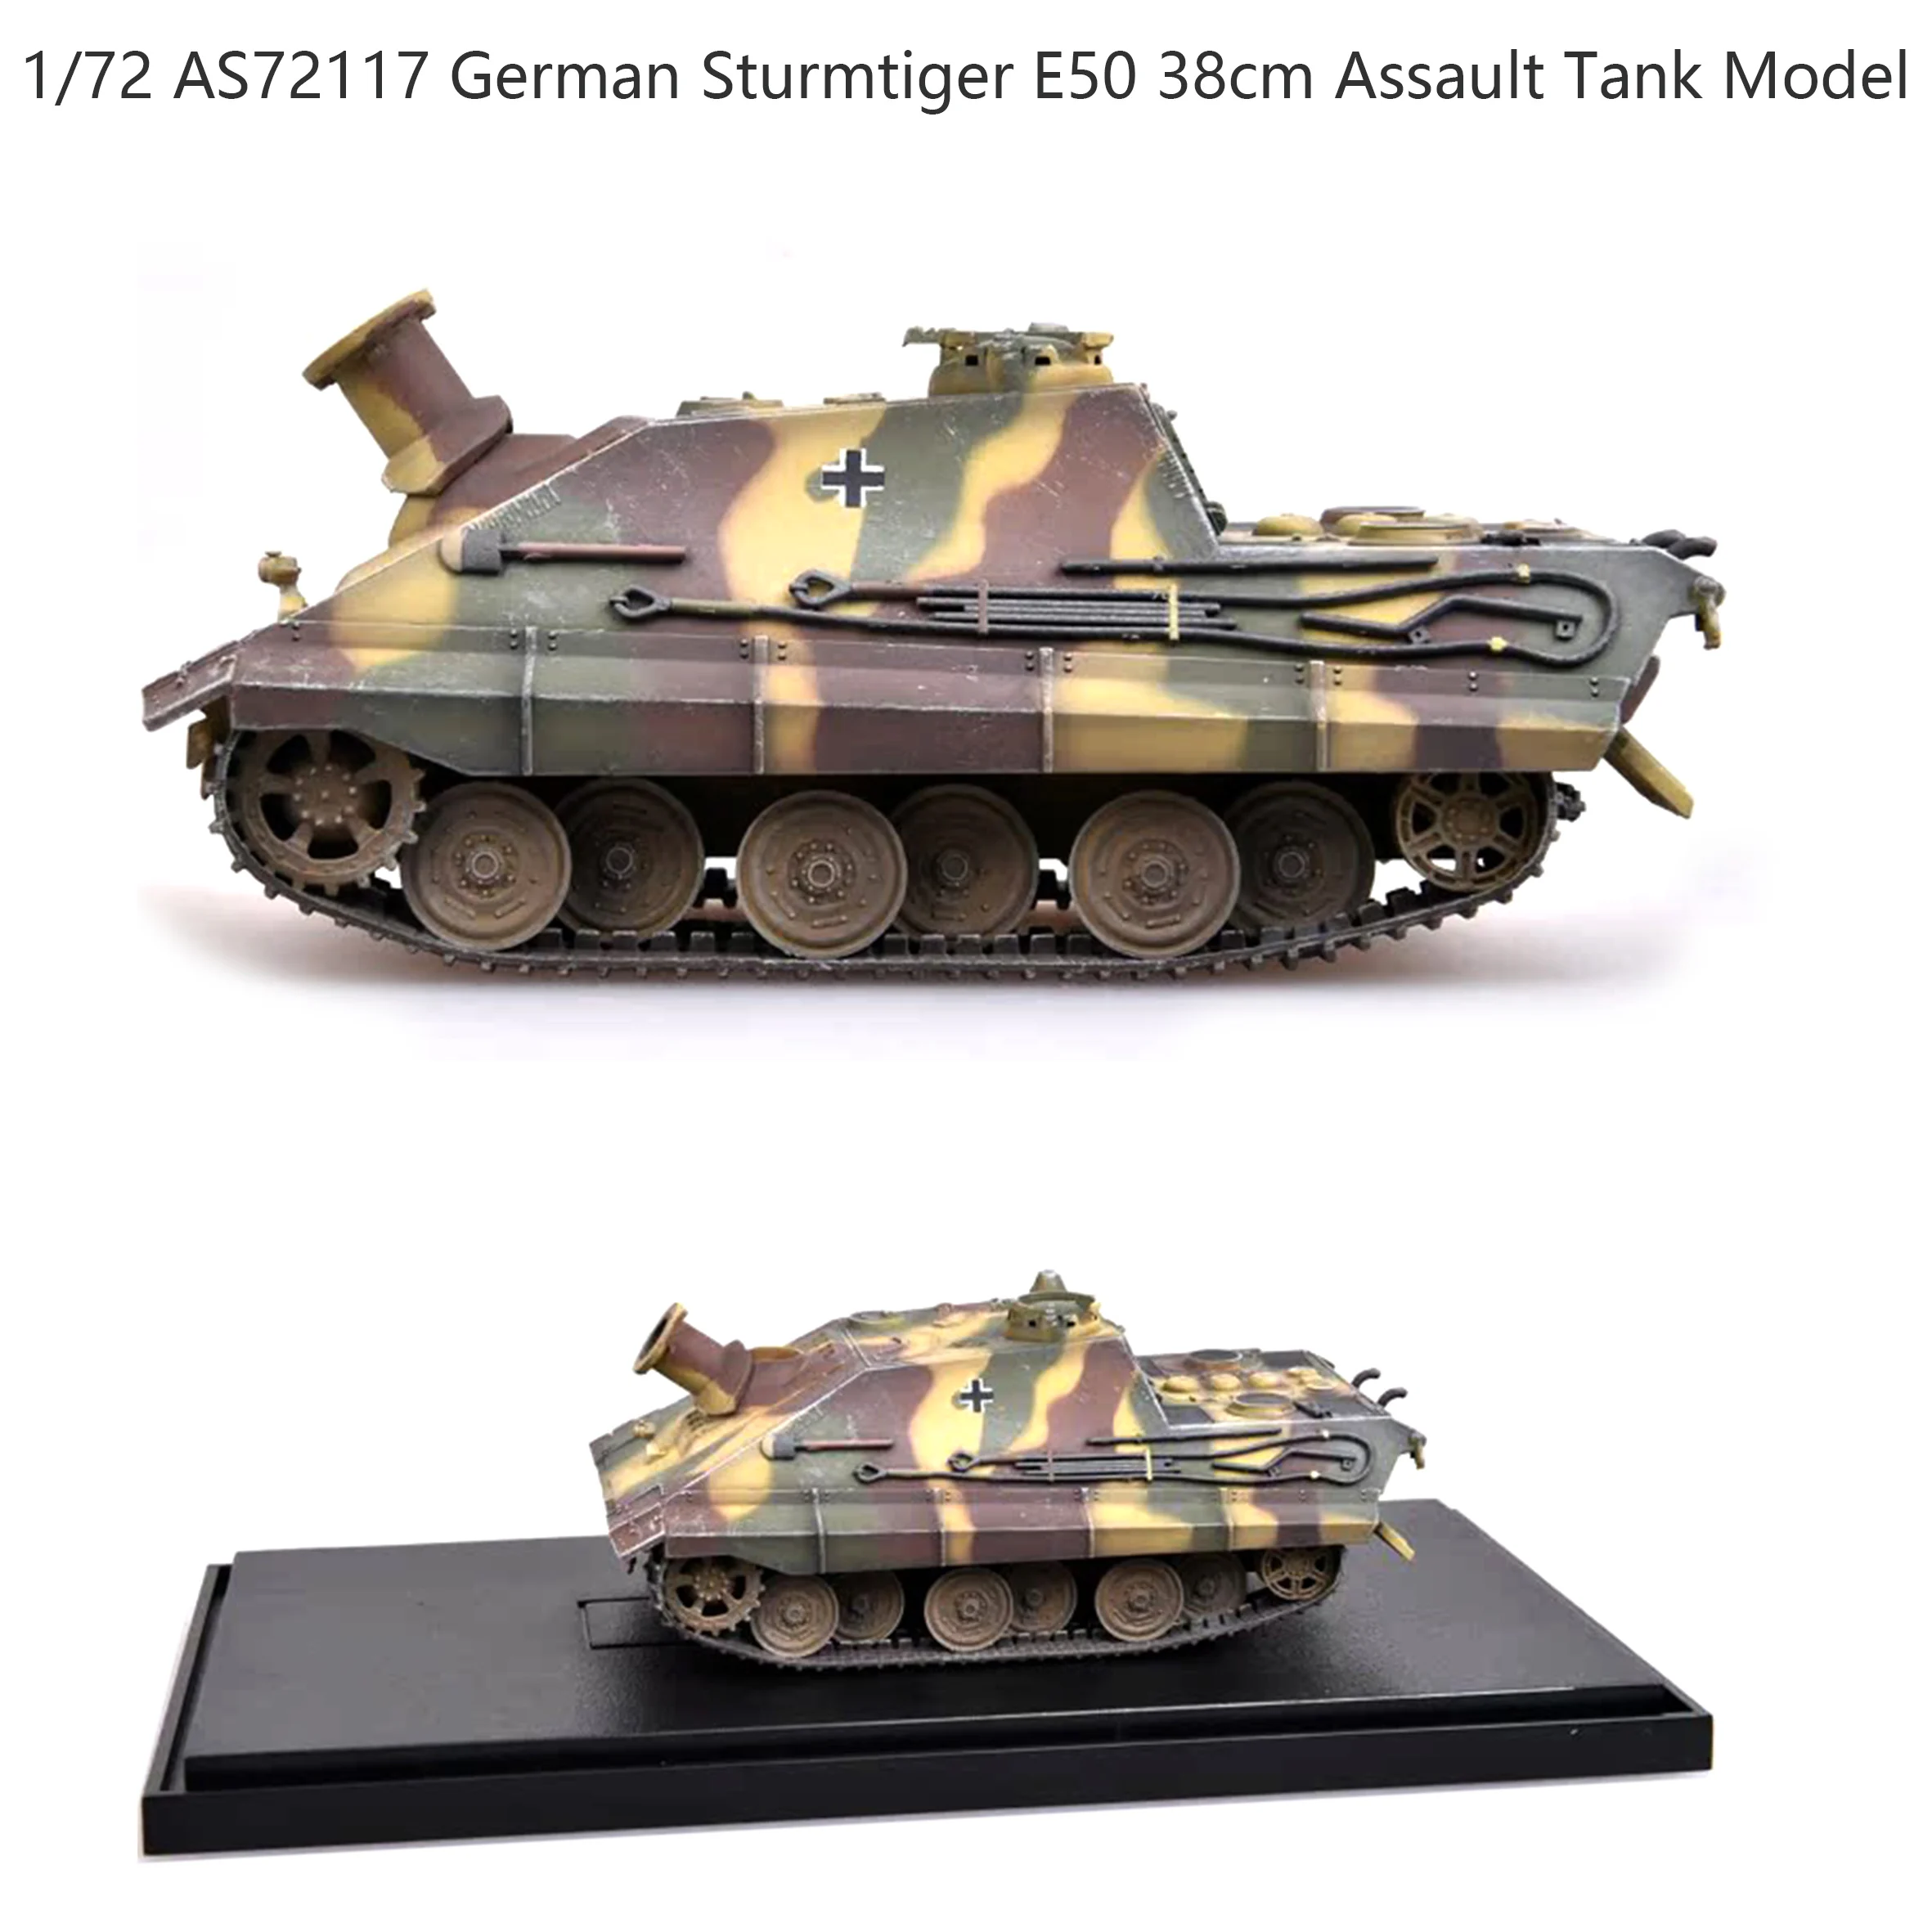 

1/72 AS72117 German Sturmtiger E50 38cm Assault Tank Model Finished product collection model